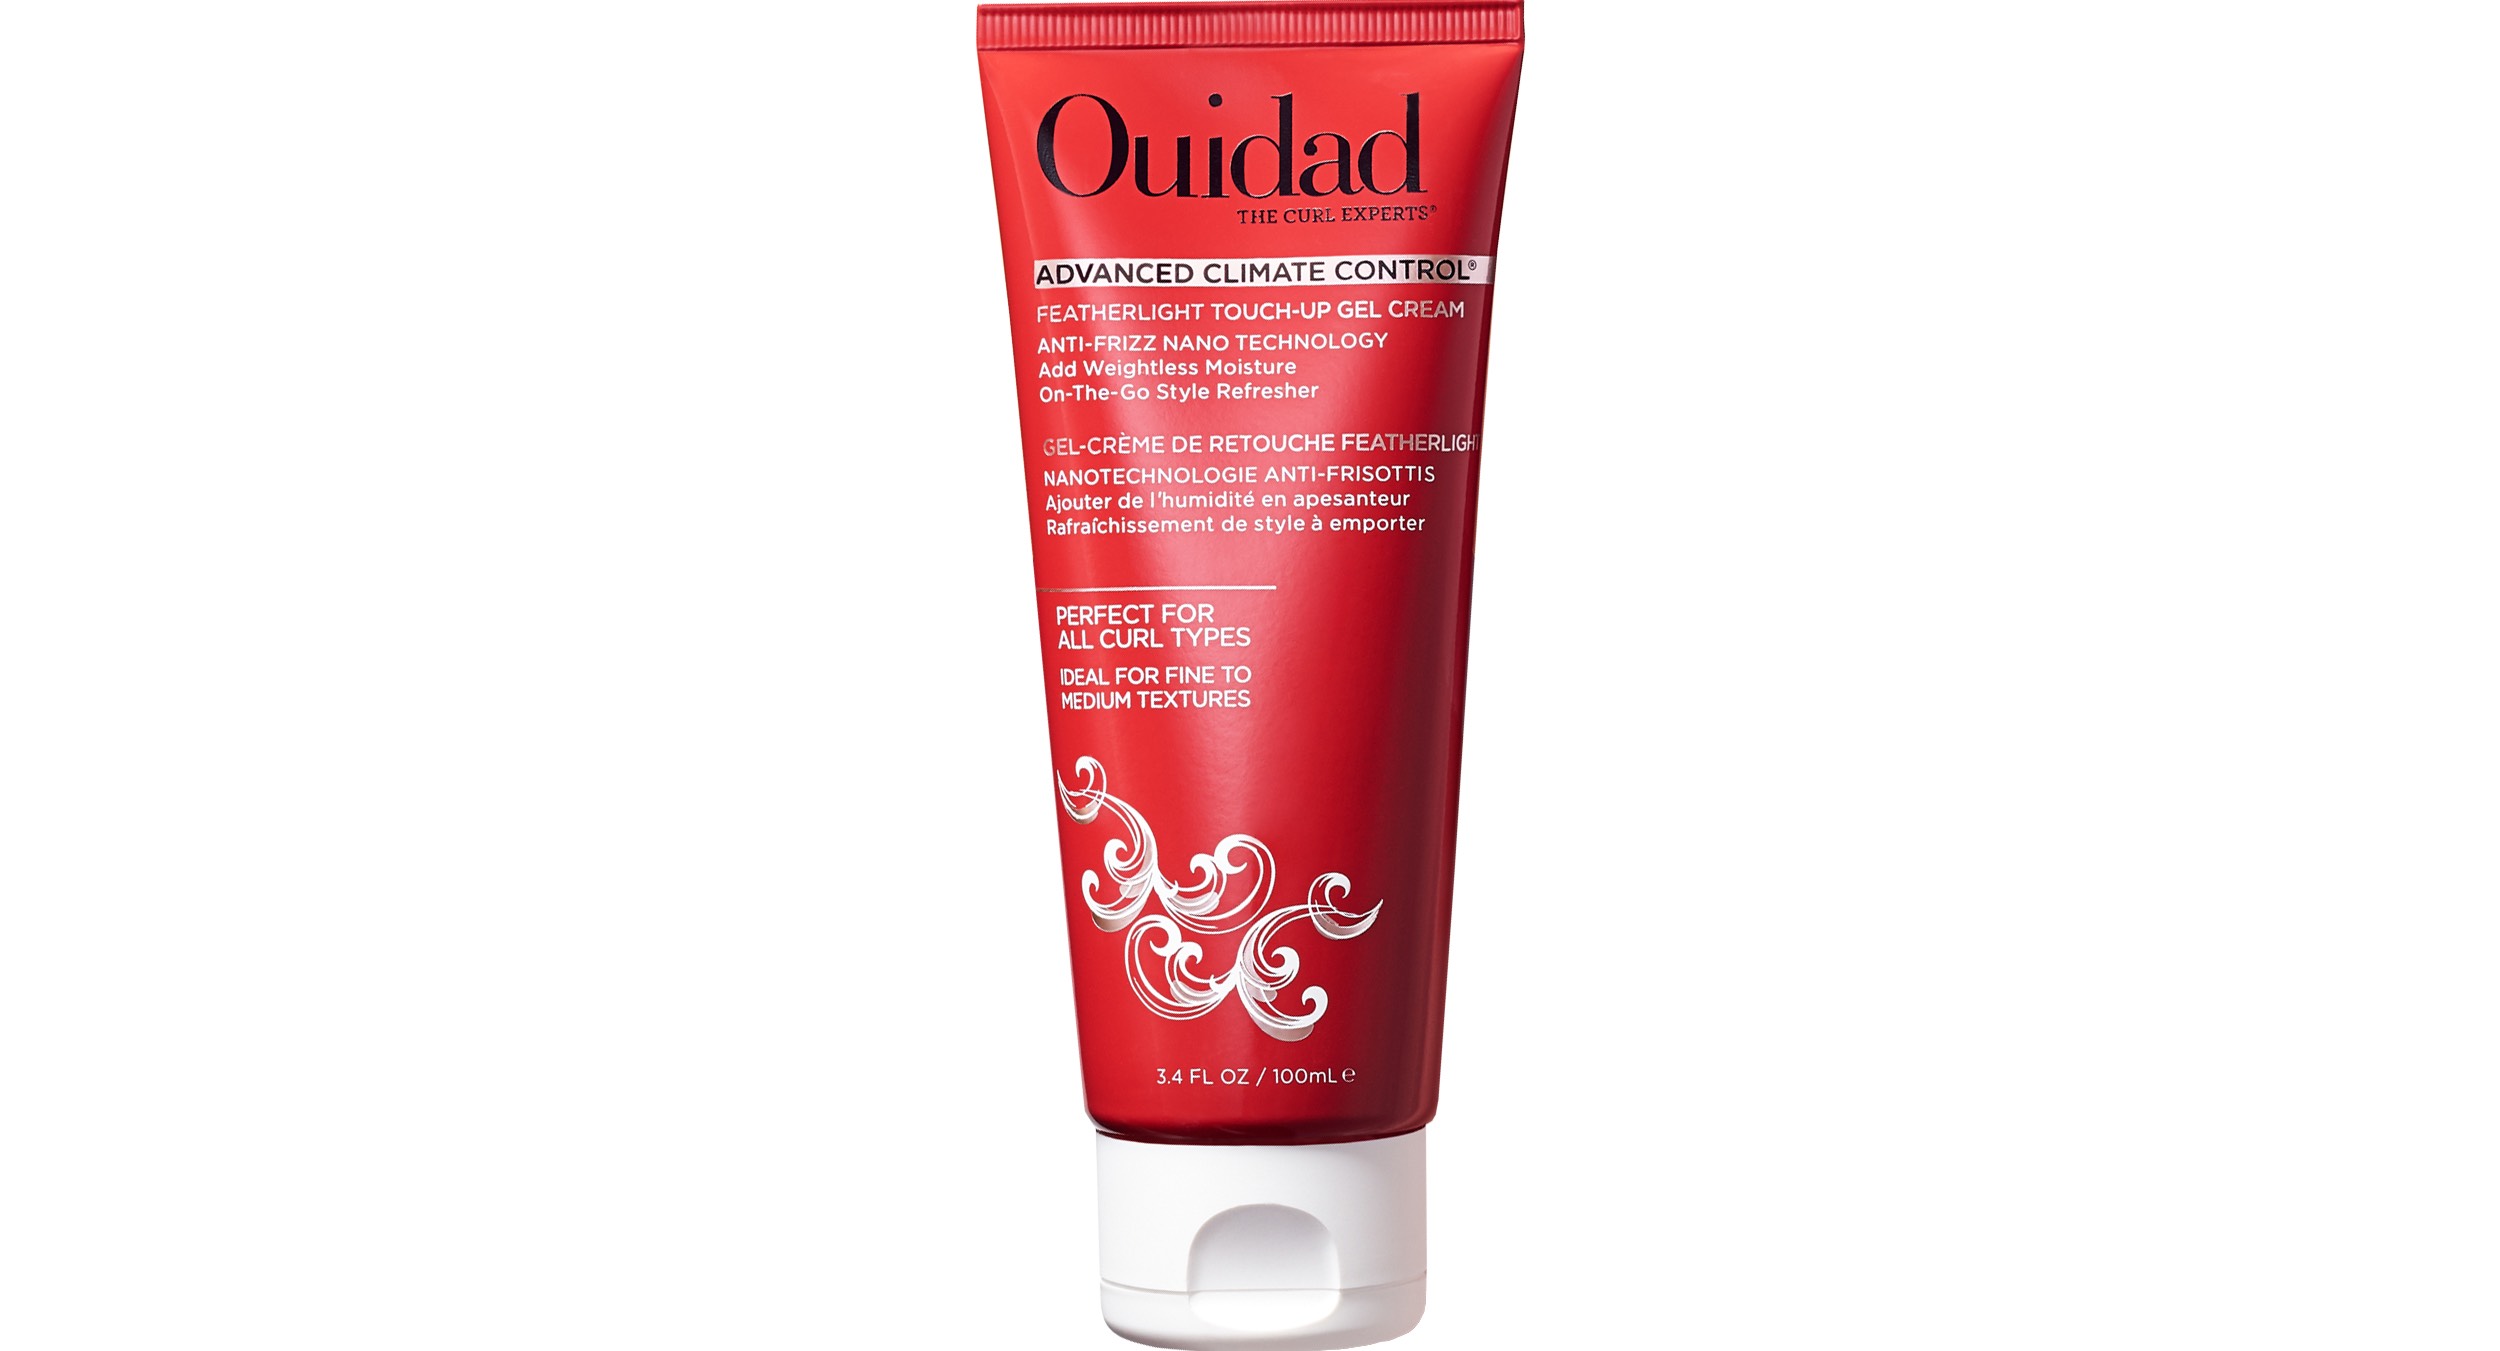 Textured Haircare Brand Ouidad Expands Advanced Climate Control Line with Three New Products 